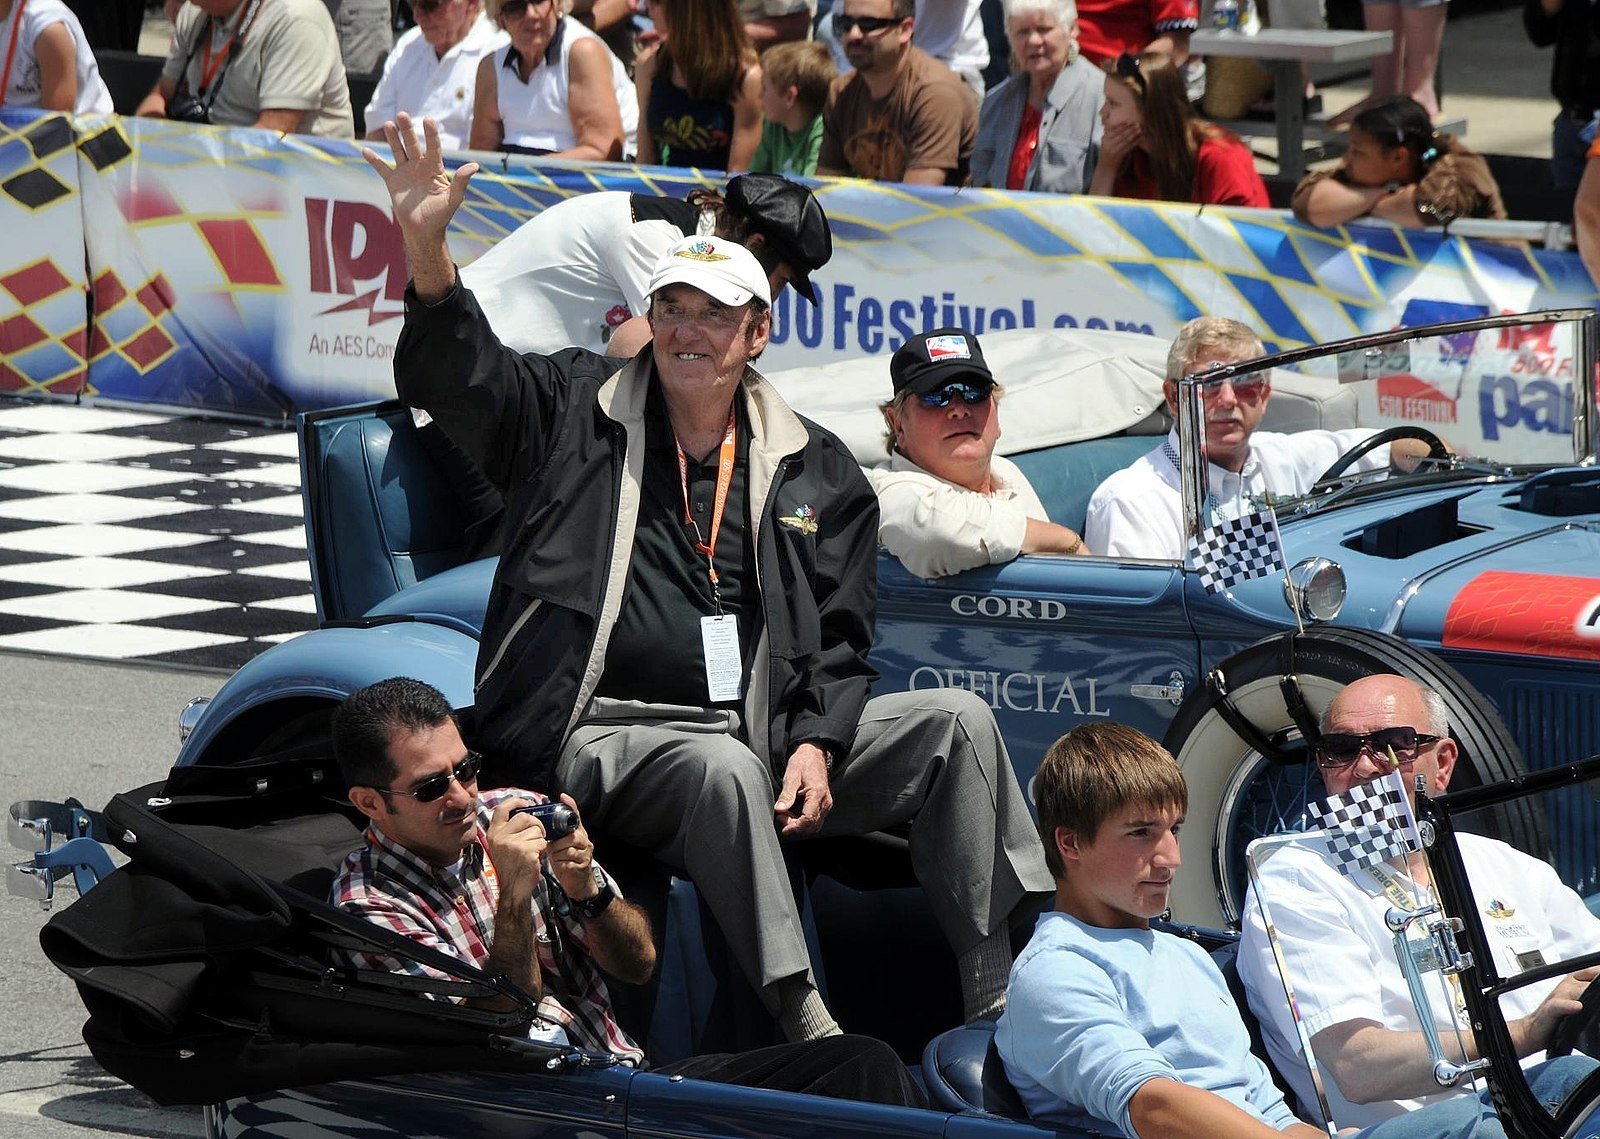 Jim Nabors at the opening of the Indianapolis 500 on May 24, 2008. | Source: Wikimedia Commons, BSquared AKA Family Paparazzi, CC BY 2.0